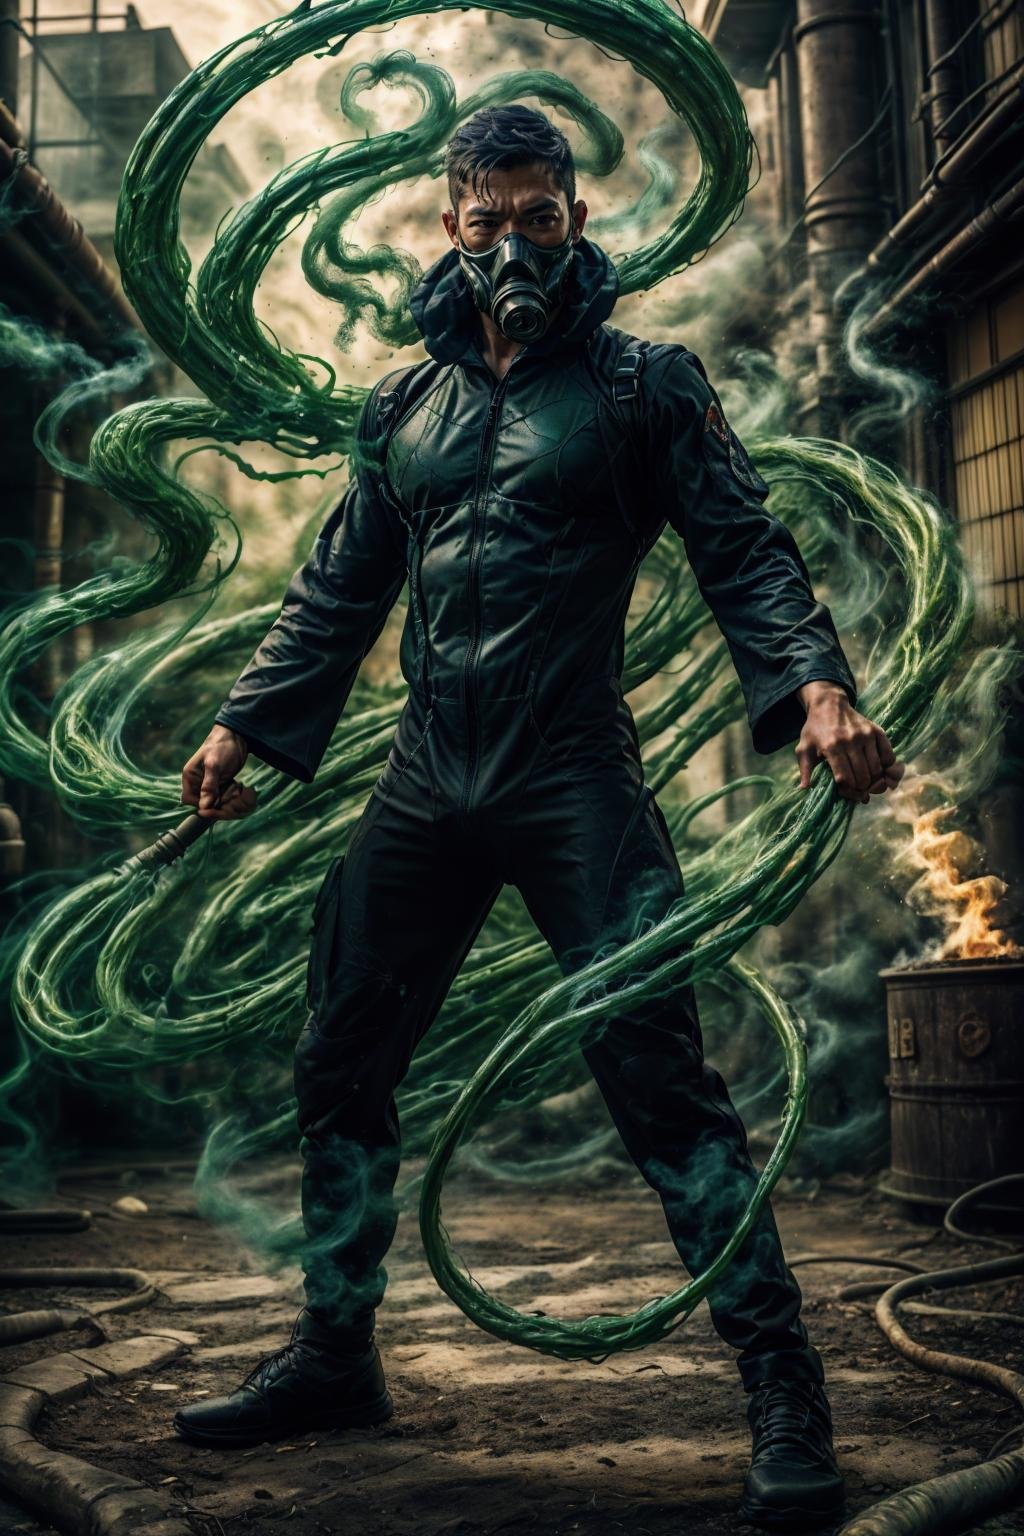 realistic, masterpiece, intricate details, detailed background, depth of field, photo of a handsome (japanese man), ven0mancer, venom smoke, dynamic pose, gas mask, bodysuit, fantasy industrial background, swirling green smoke, outdoors,